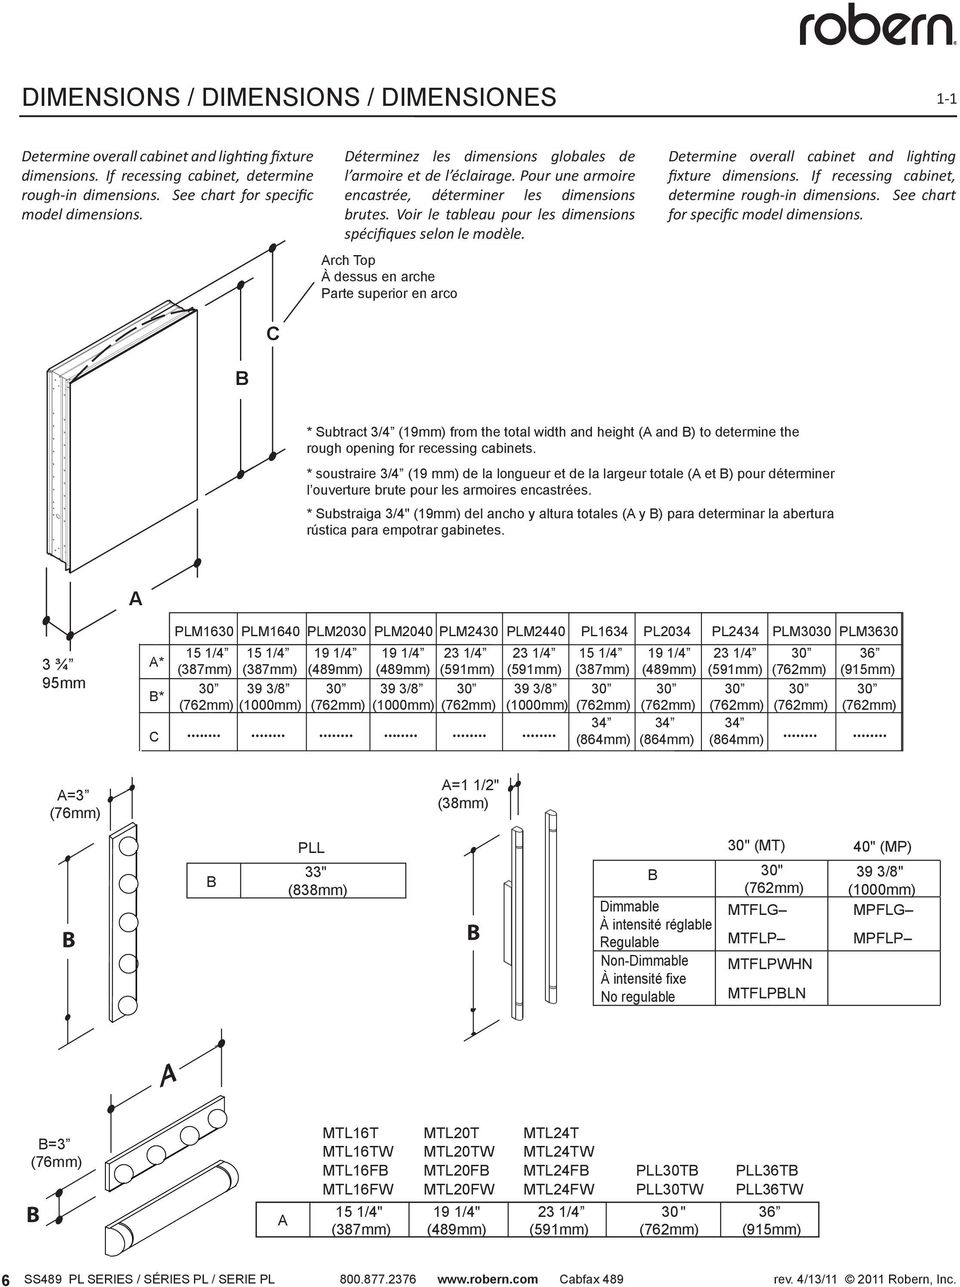 Arch Top À dessus en arche Parte superior en arco Determine overall cabinet and lighting fixture dimensions. If recessing cabinet, determine rough-in dimensions.